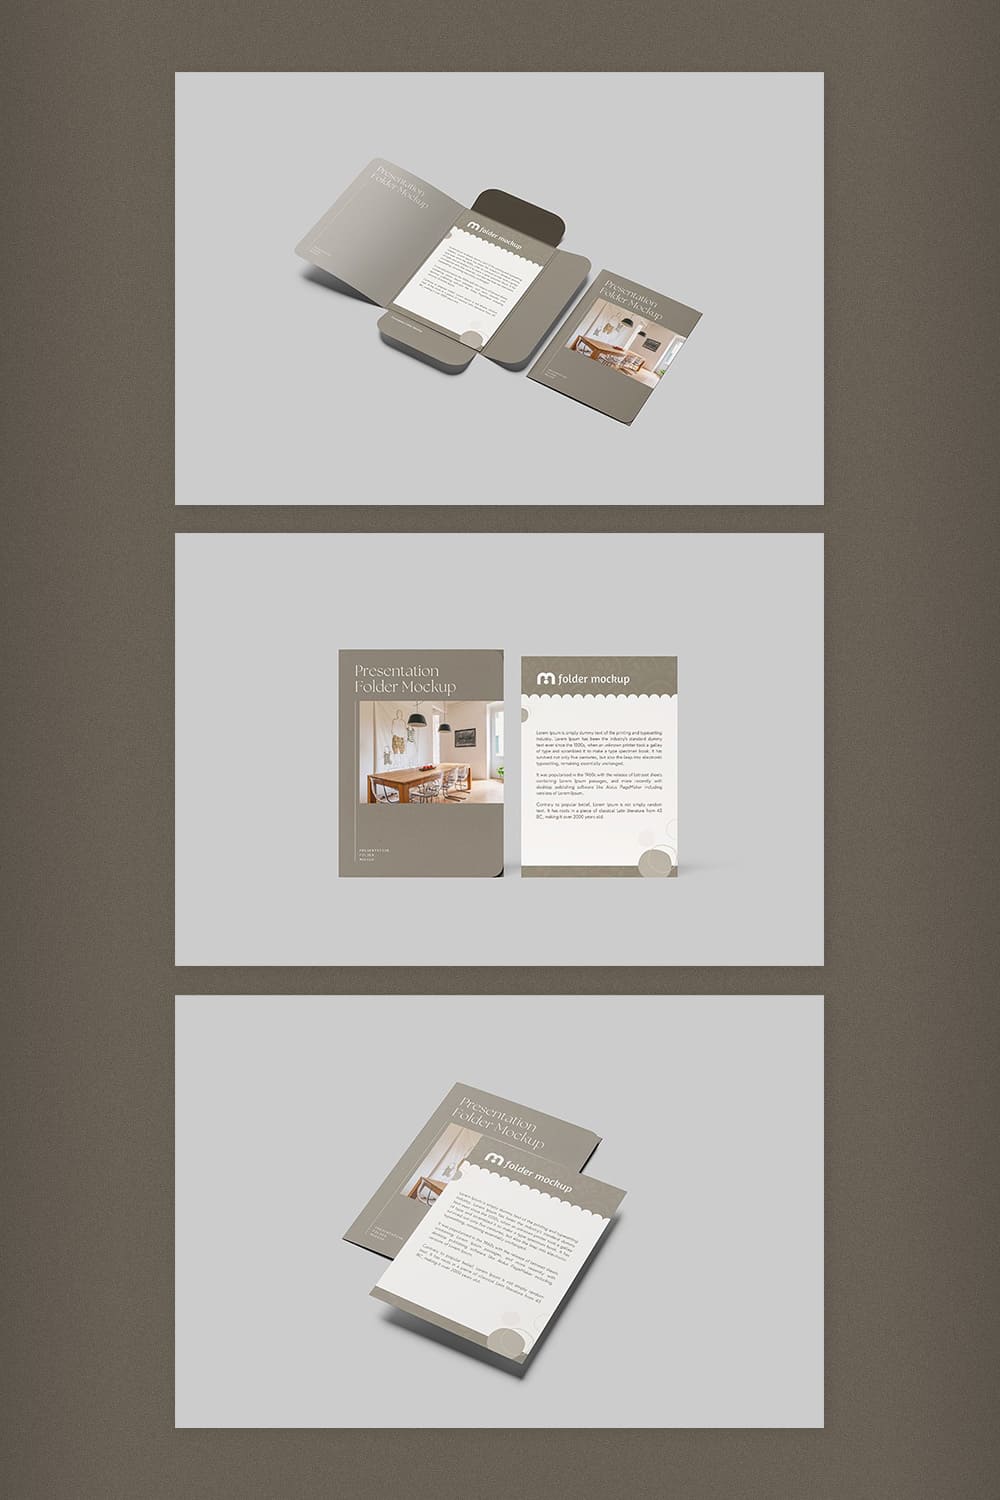 A pack of images of presentation folders with an enchanting design.